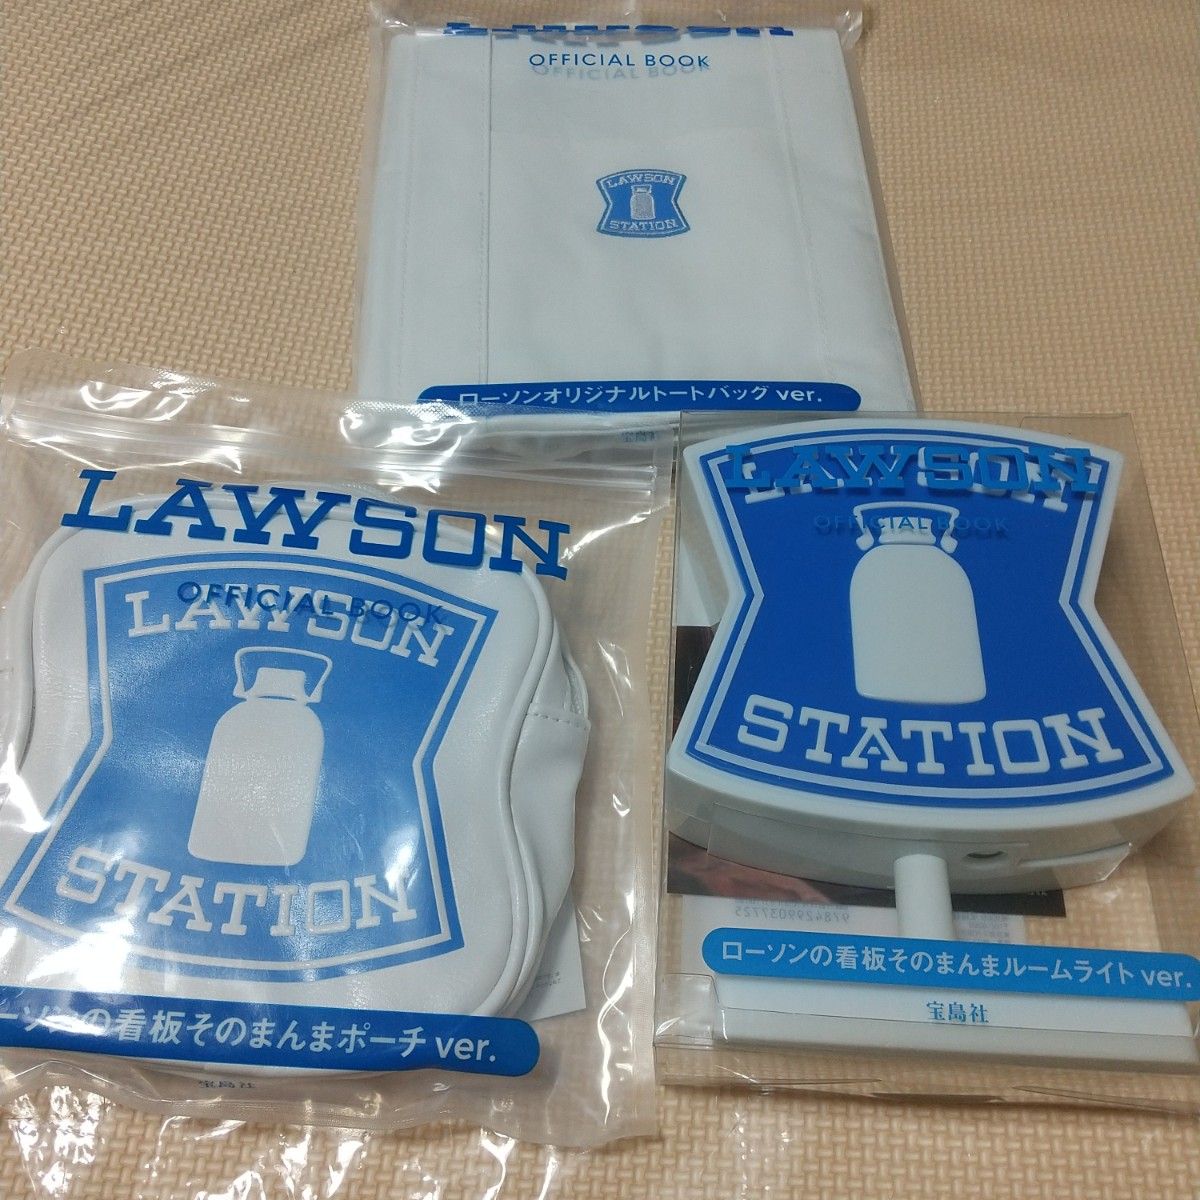 LAWSON 宝島社 OFFICIAL Book 看板 ポーチトートバッグ 3点セット